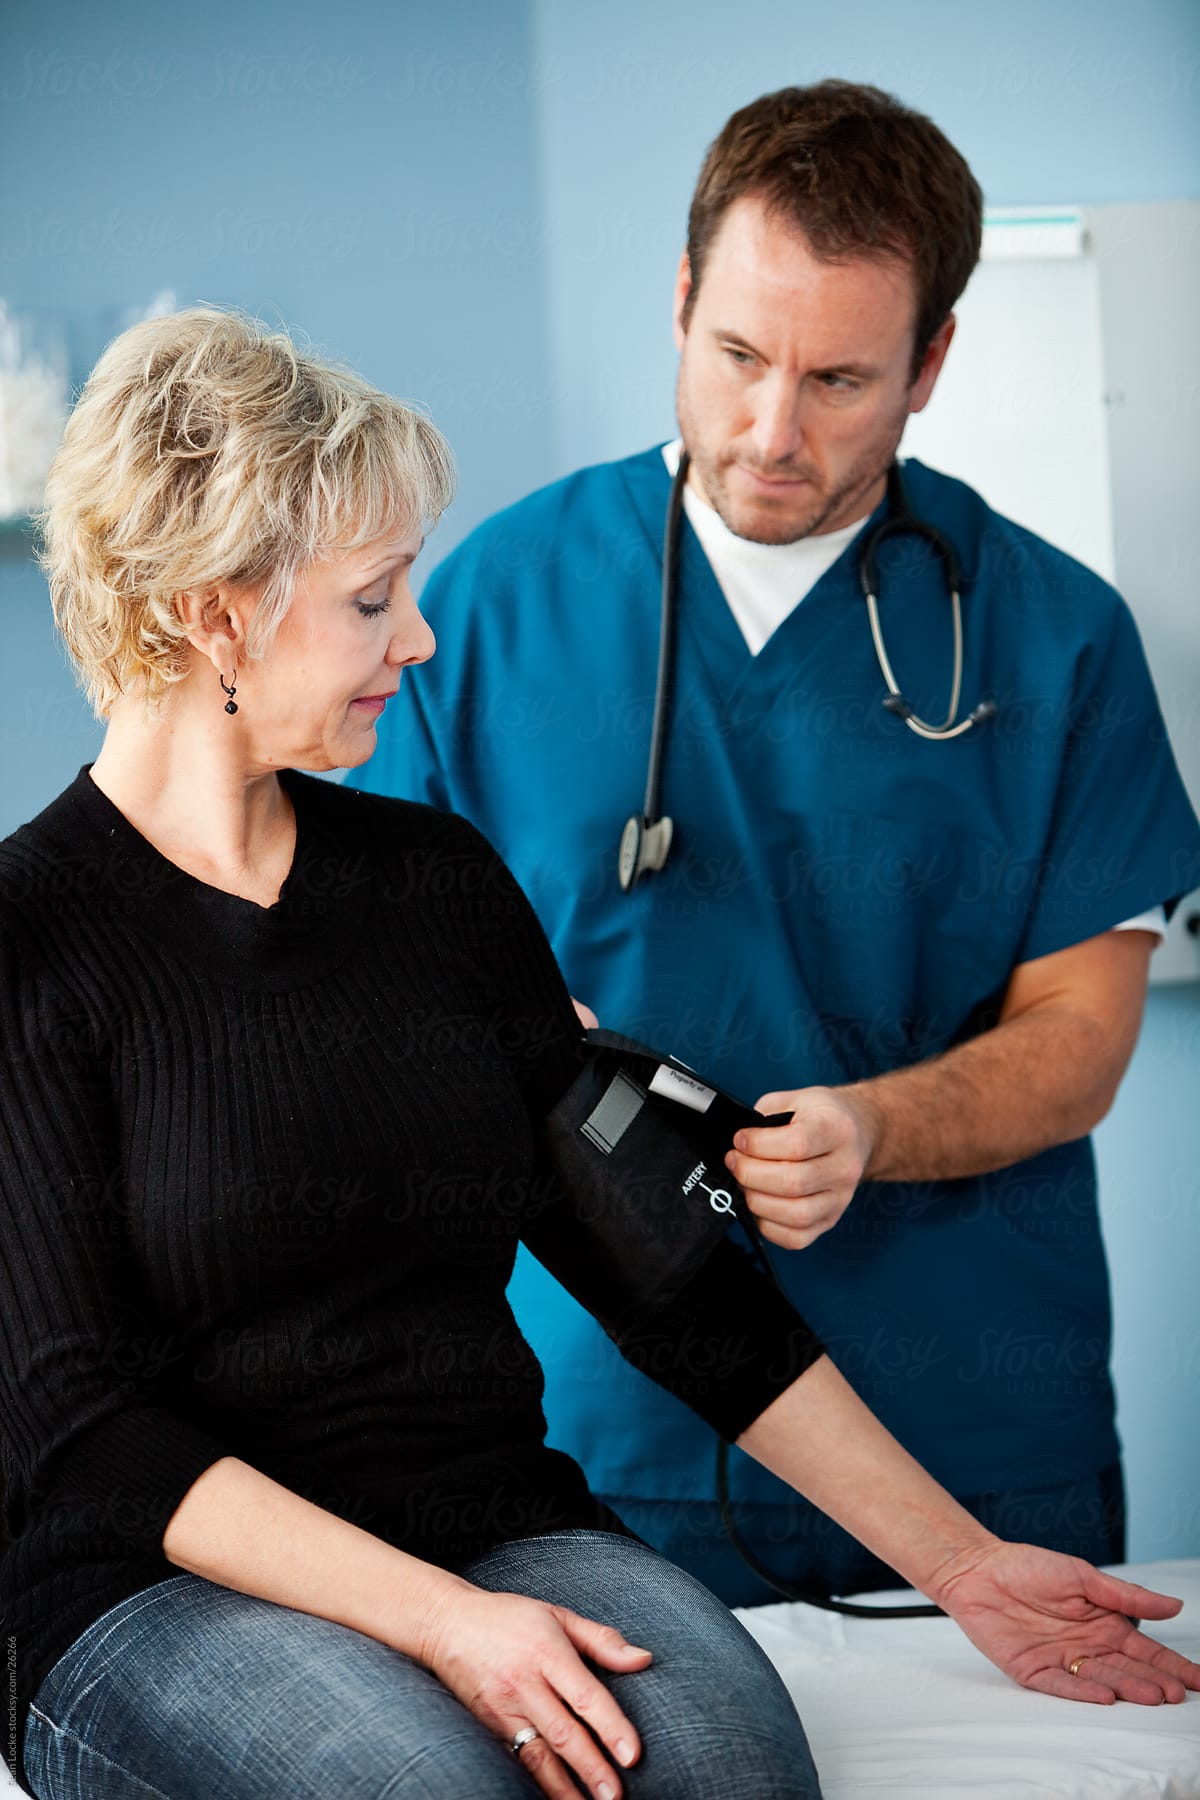 Exam Room: Mature Woman Gets a Blood Pressure Reading